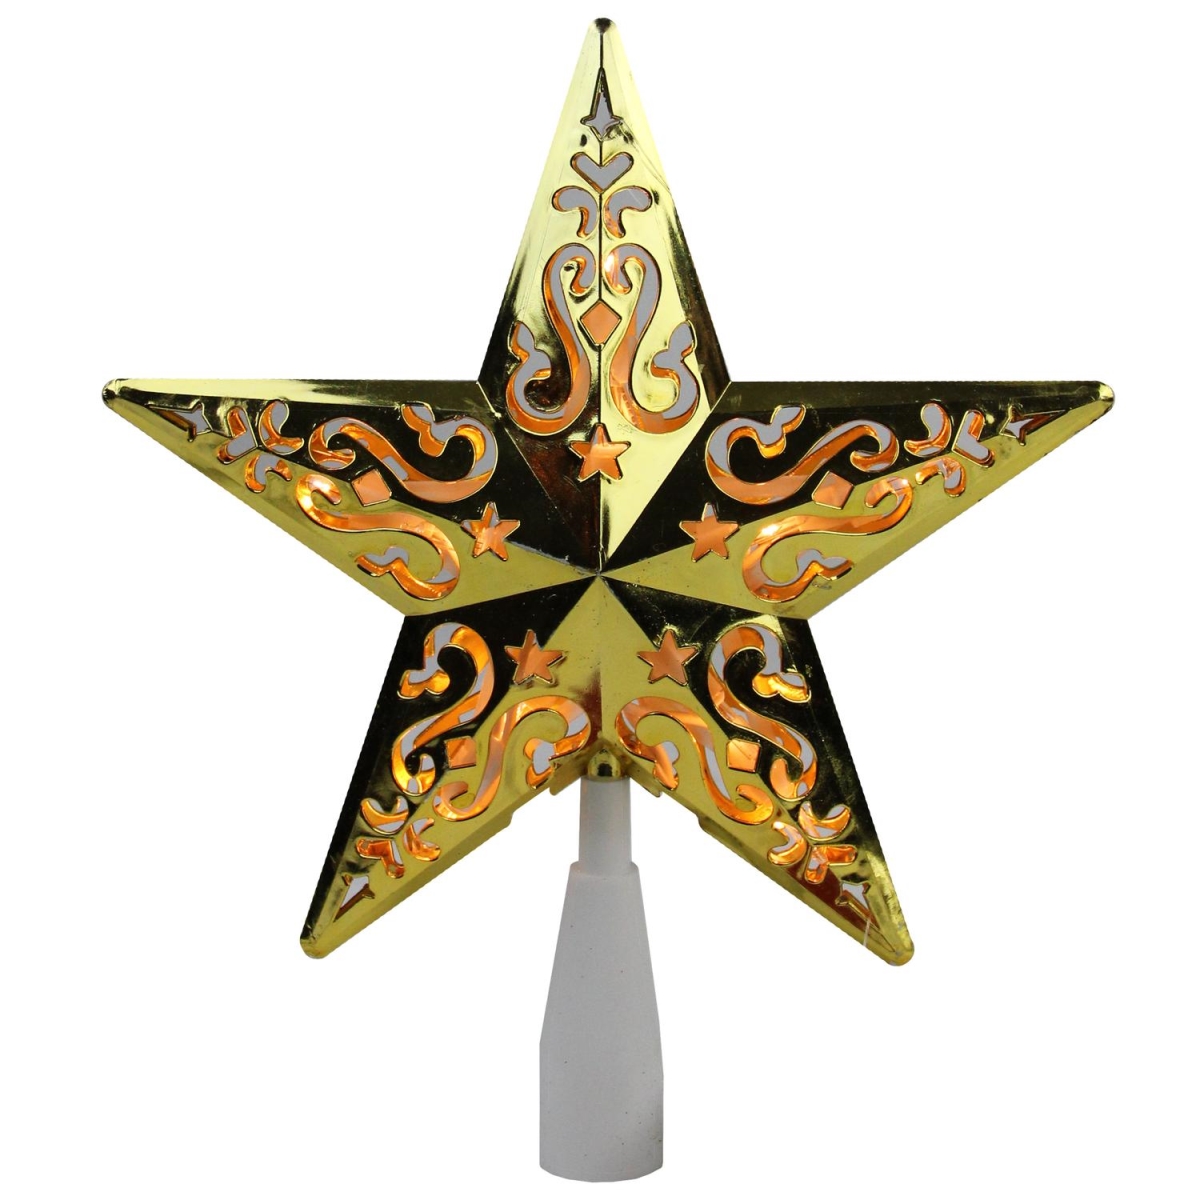 Picture of Northlight 32606344 8.5 in. Gold Star Cut-Out Design Christmas Tree Topper - Clear Lights